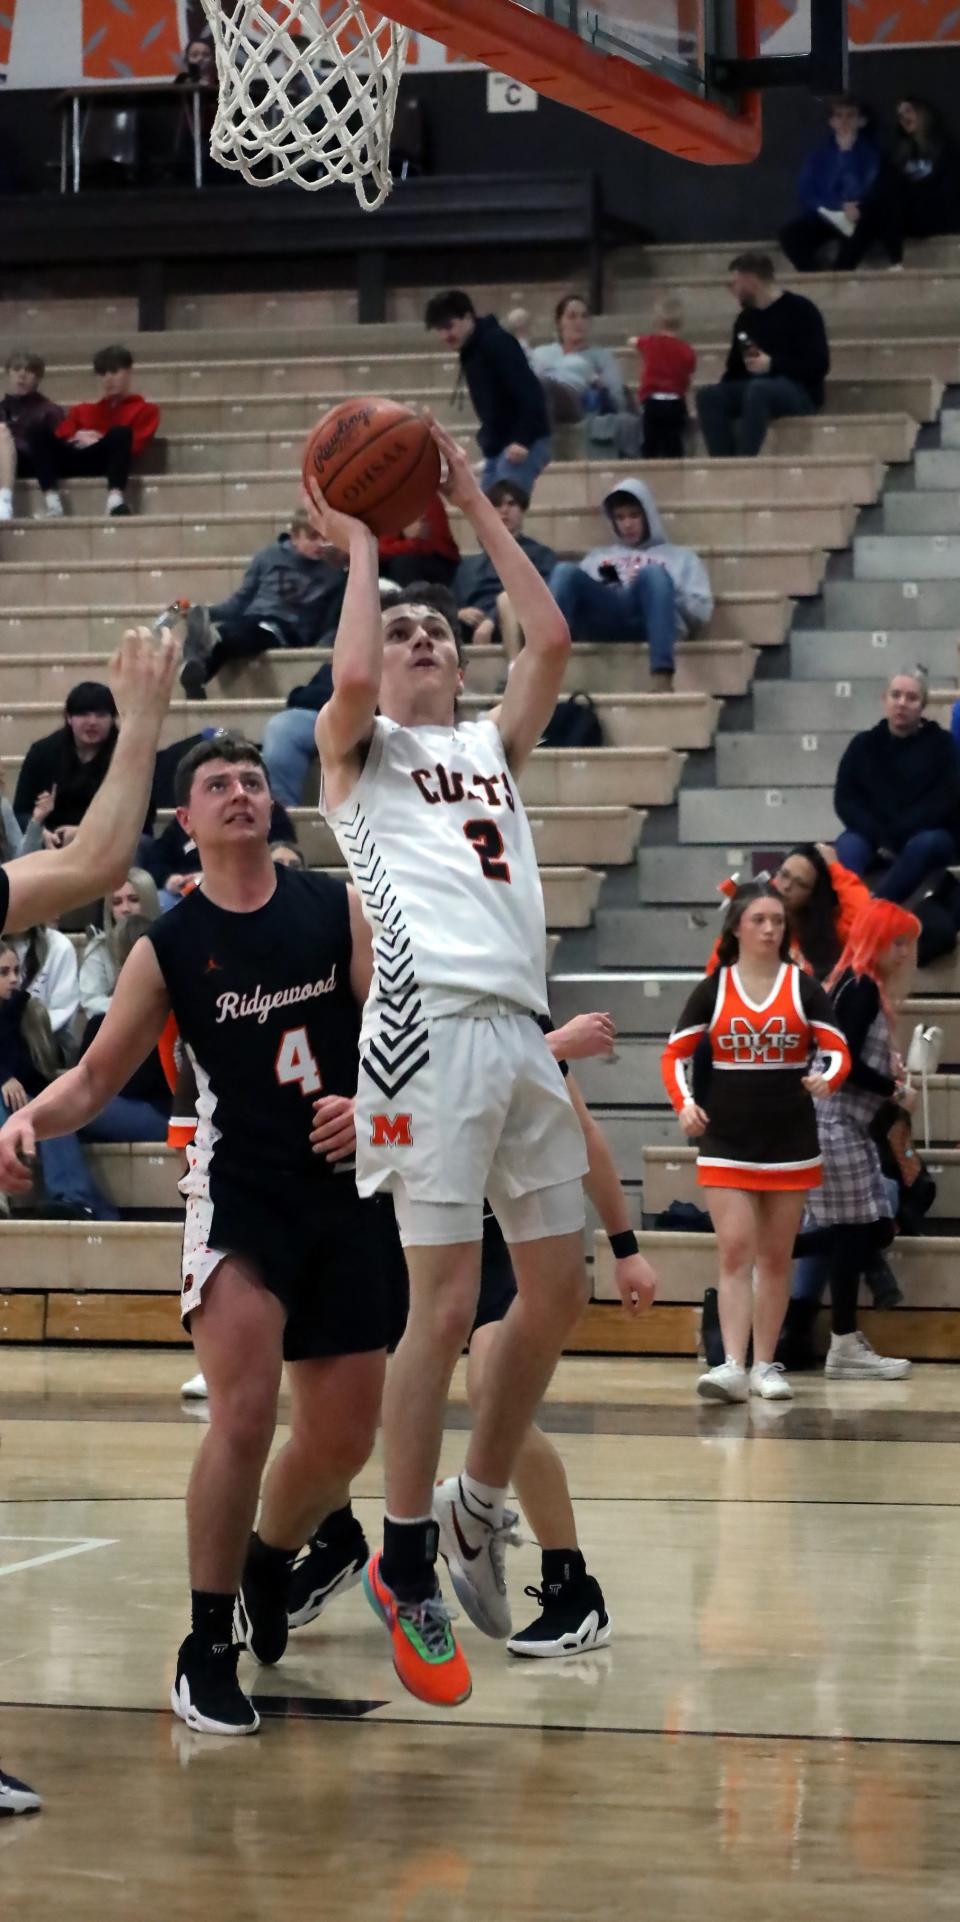 Meadowbrook's Masyn Campbell (2) puts up a shot during the Colts versus Generals basketball game Tuesday evening at Meadowbrook High School.